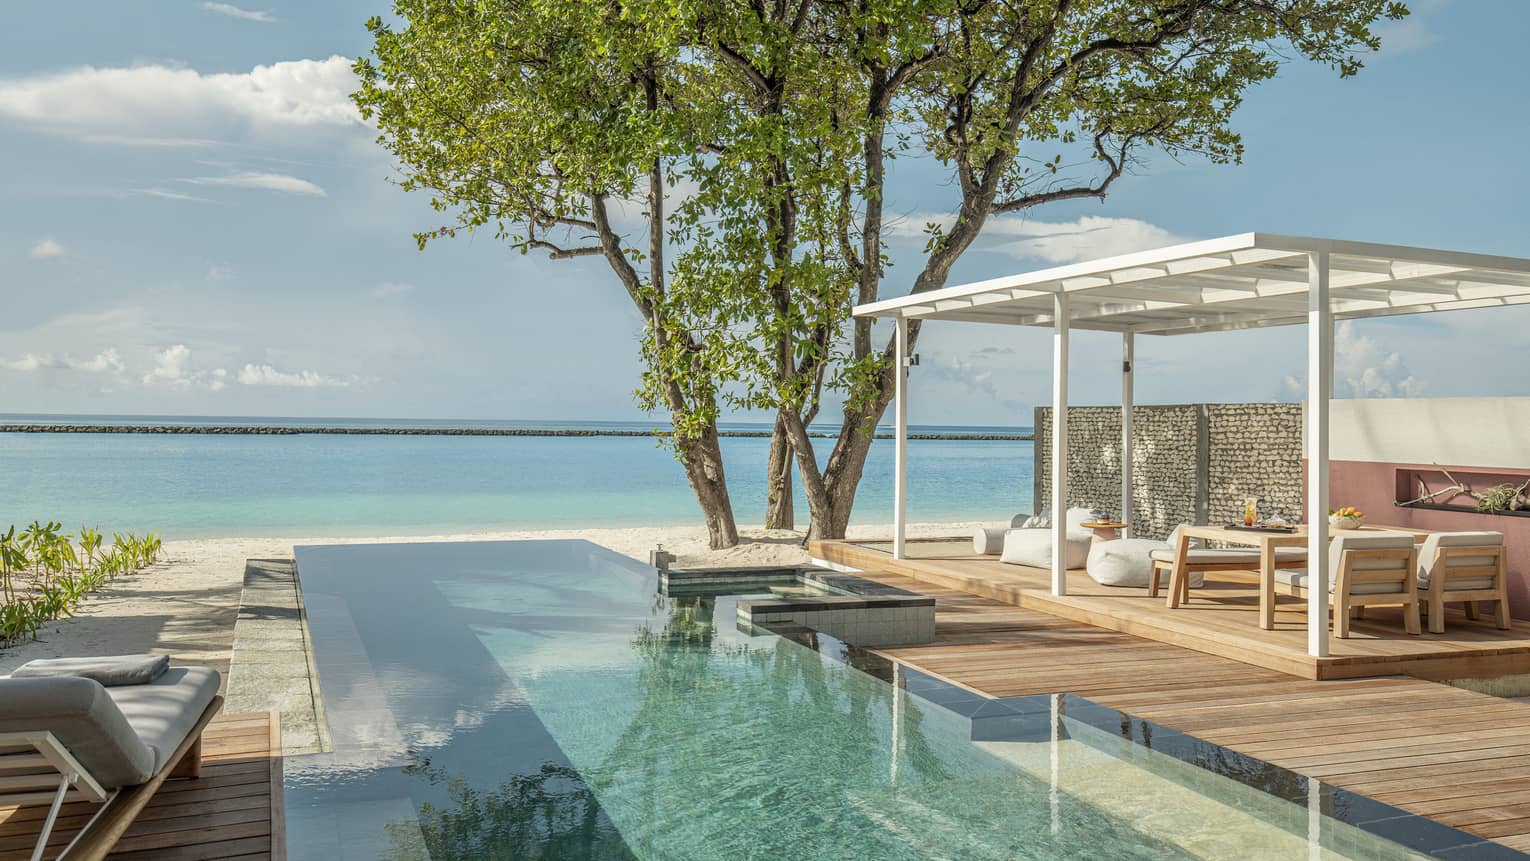 Private pool and lounge deck overlooking Maldivian ocean